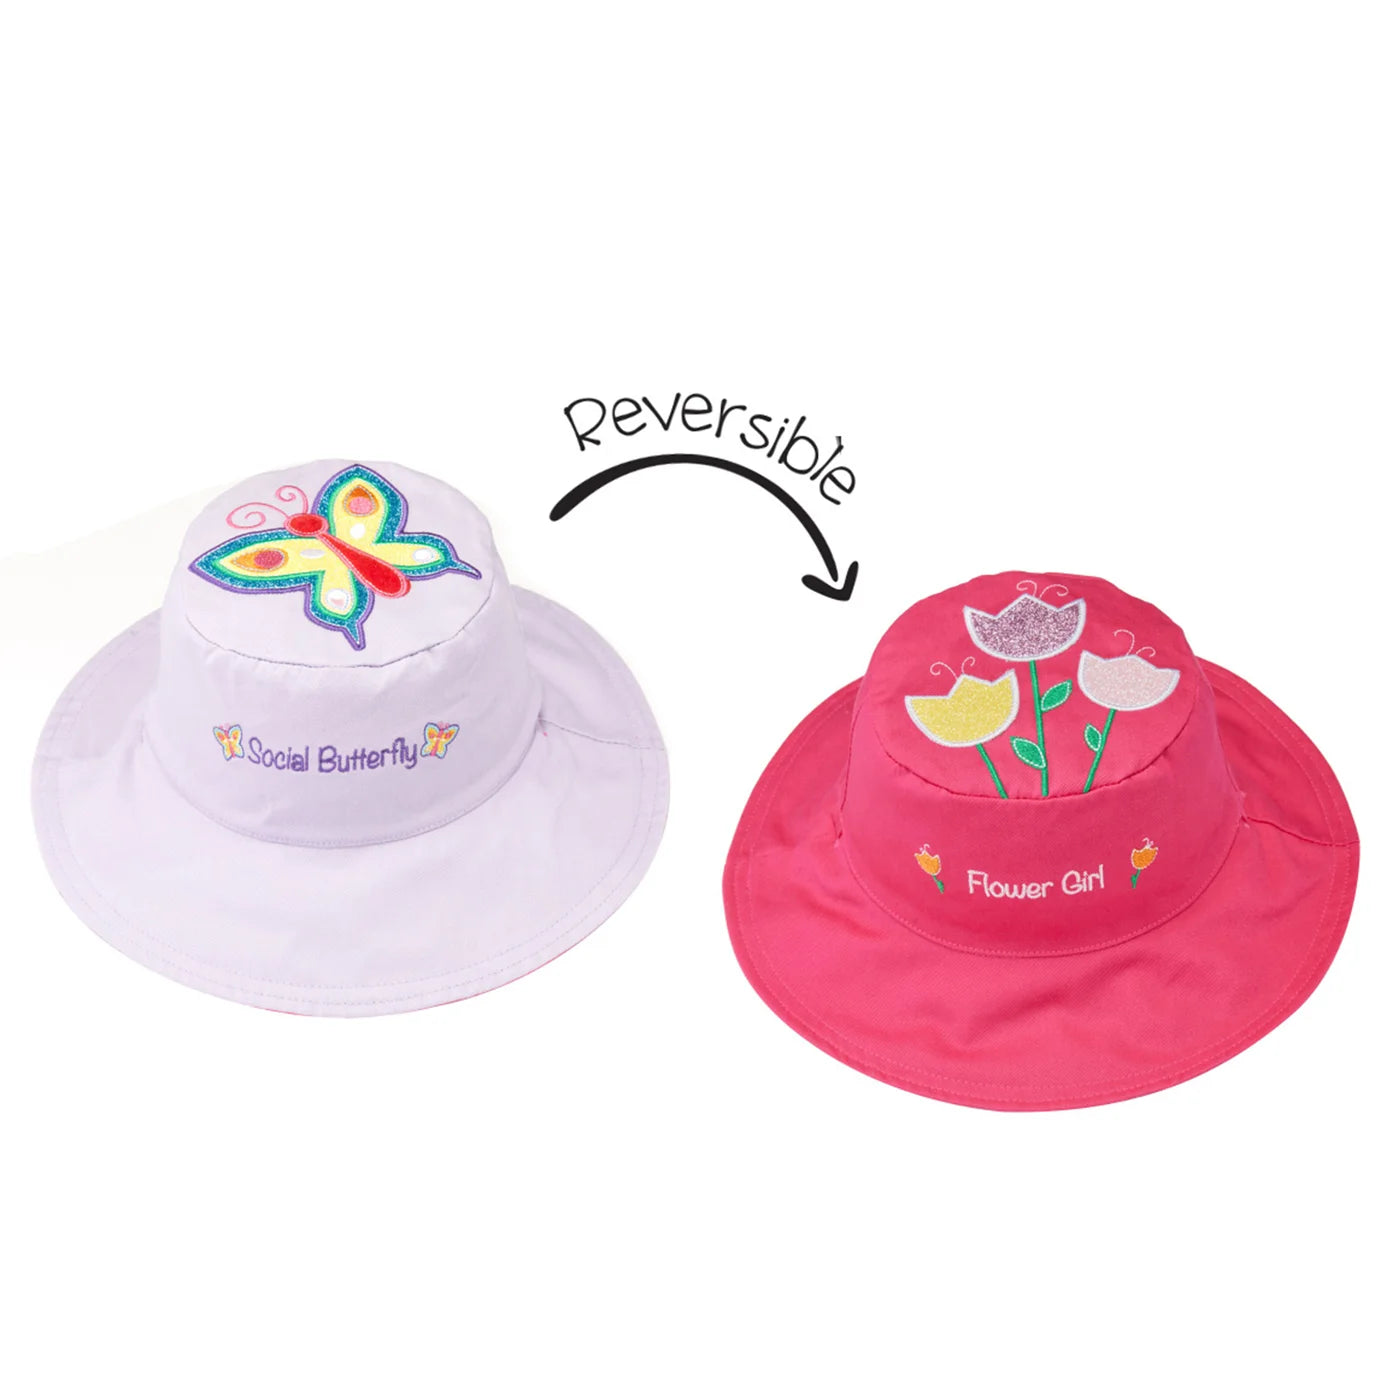 Reversible Cotton Sun Hat: Butterfly/Tulips - Size Small/Ages 6